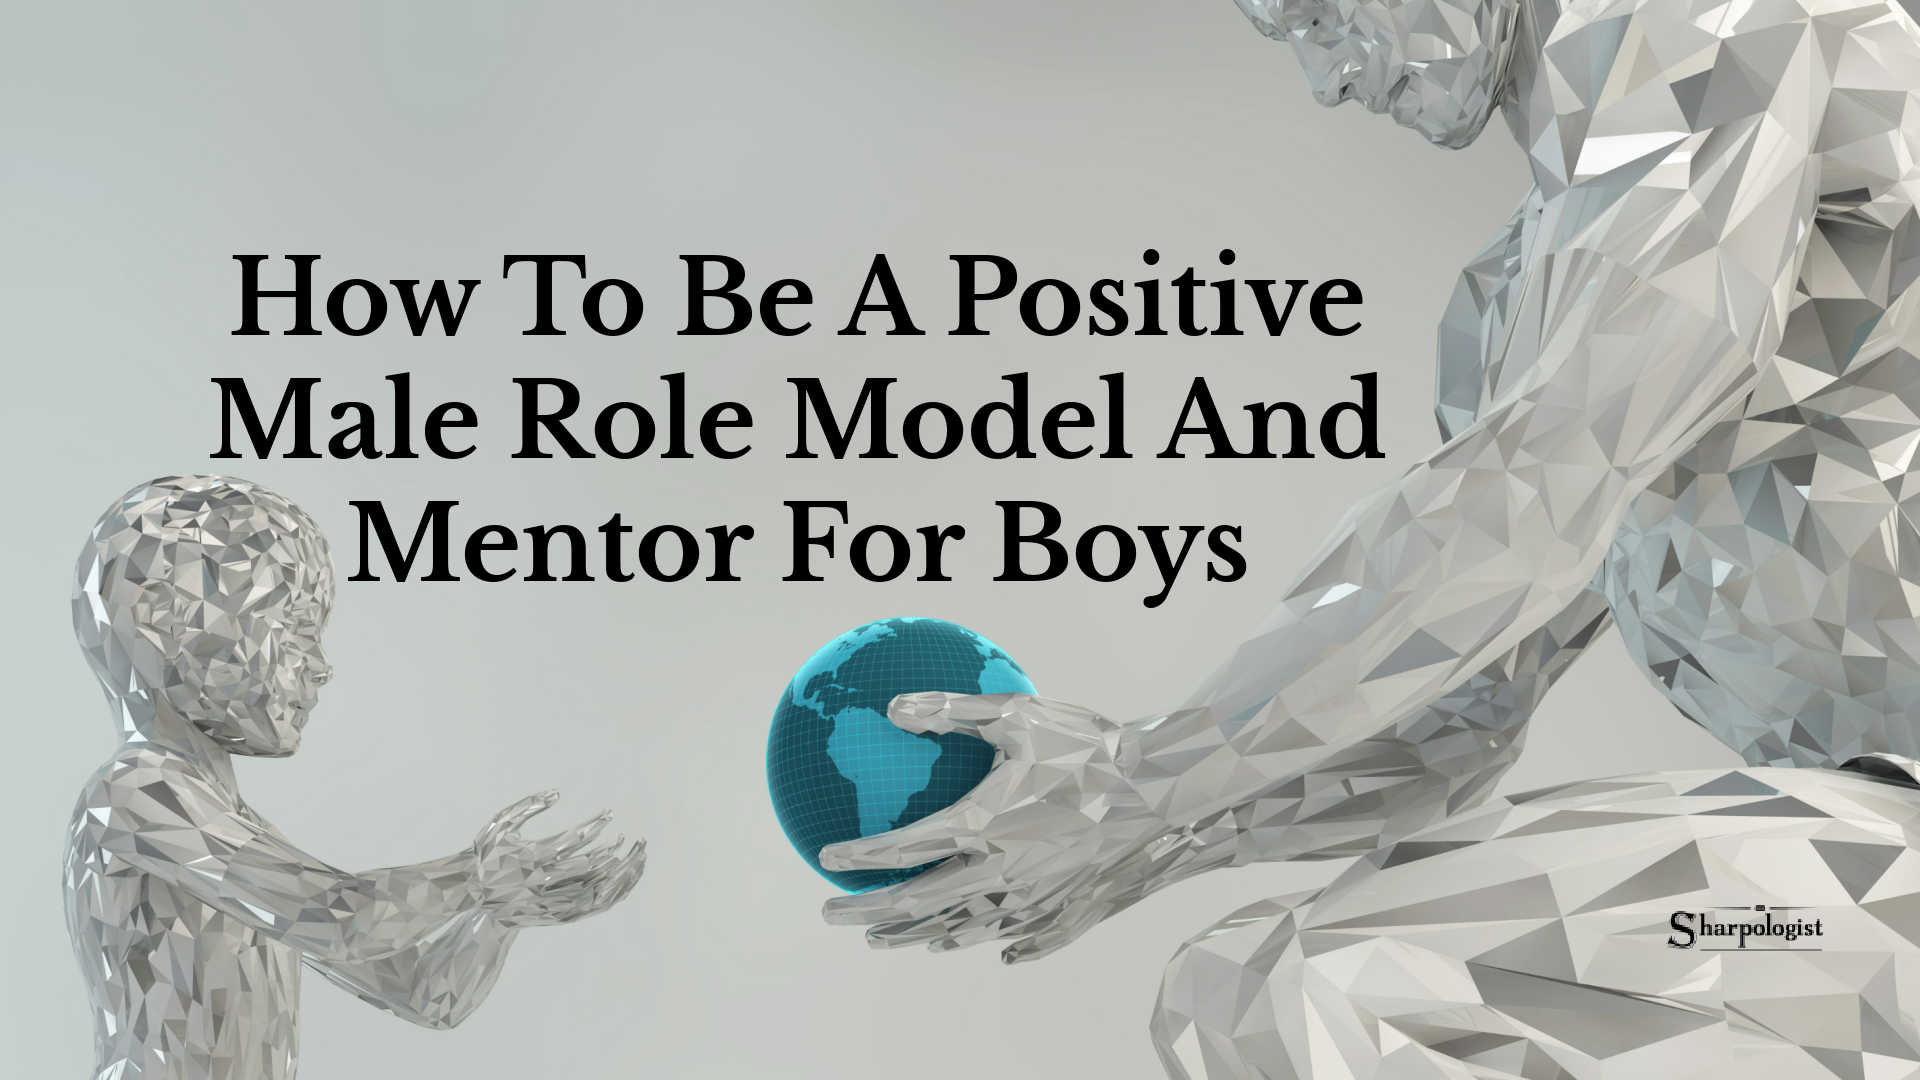 How To Be A Positive Male Role Model And Mentor For Boys